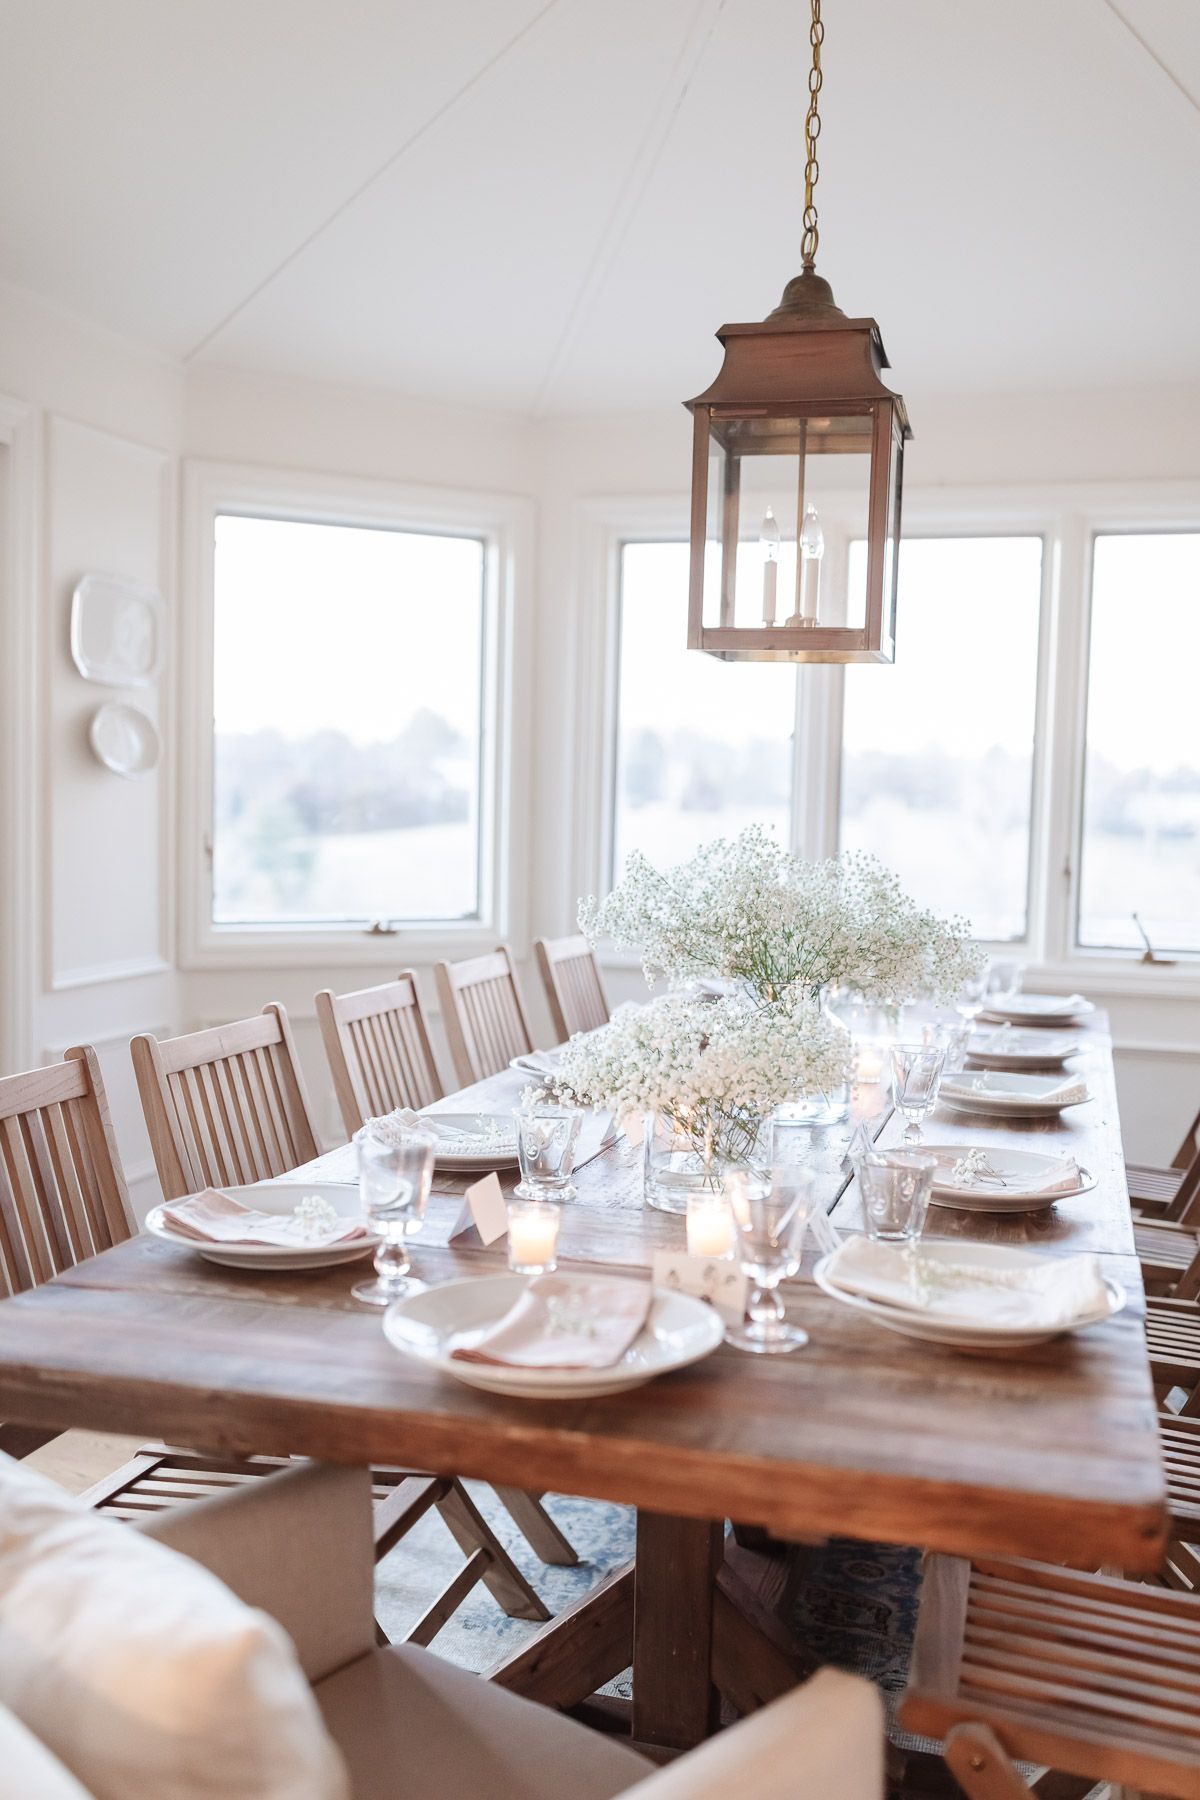 A farmhouse dining table surrounded by wood chairs in a white dining room